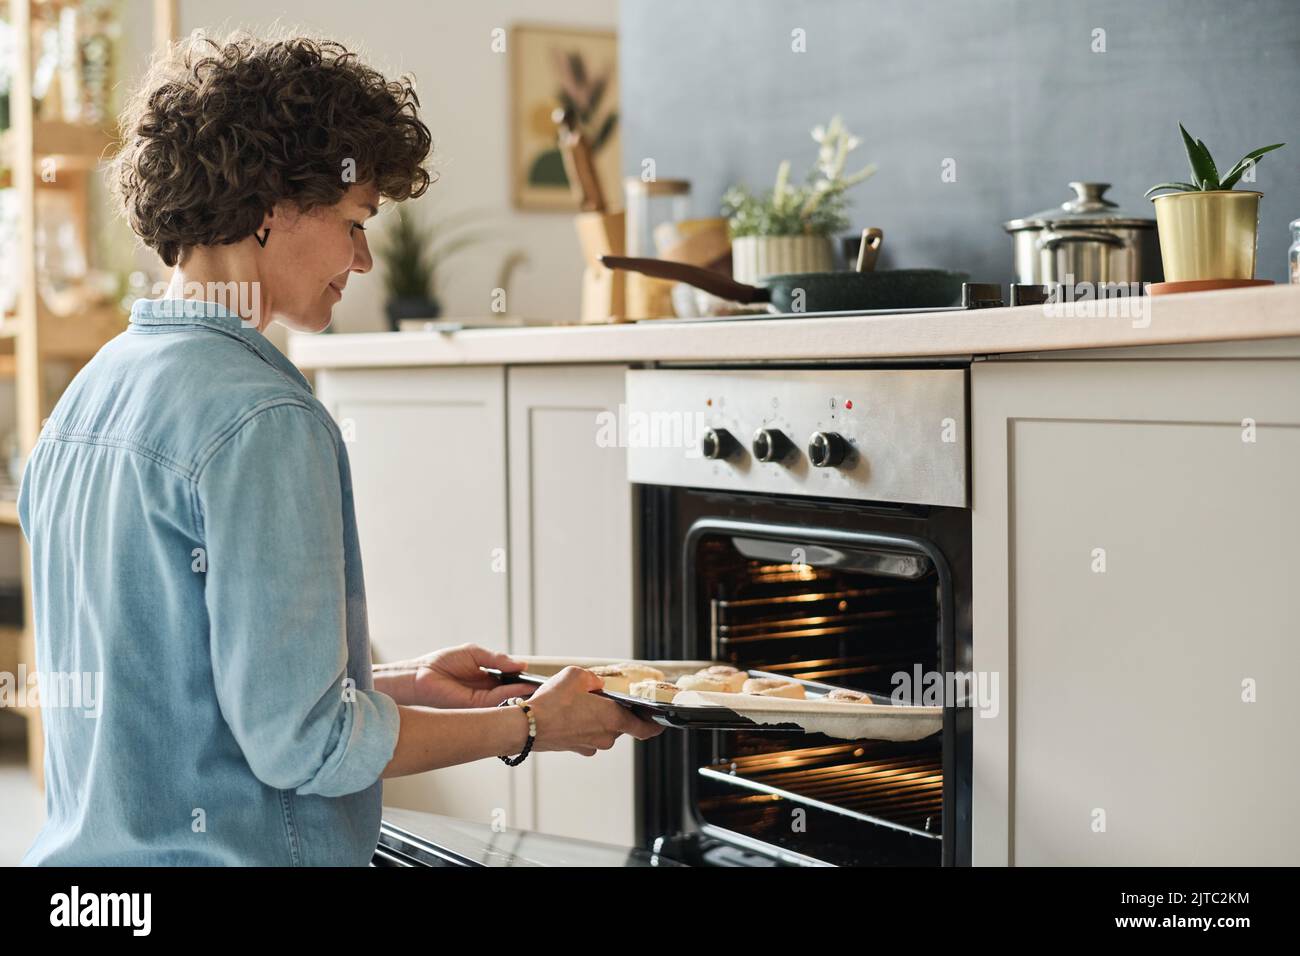 Young woman putting tray with buns in the oven while cooking in domestic kitchen Stock Photo